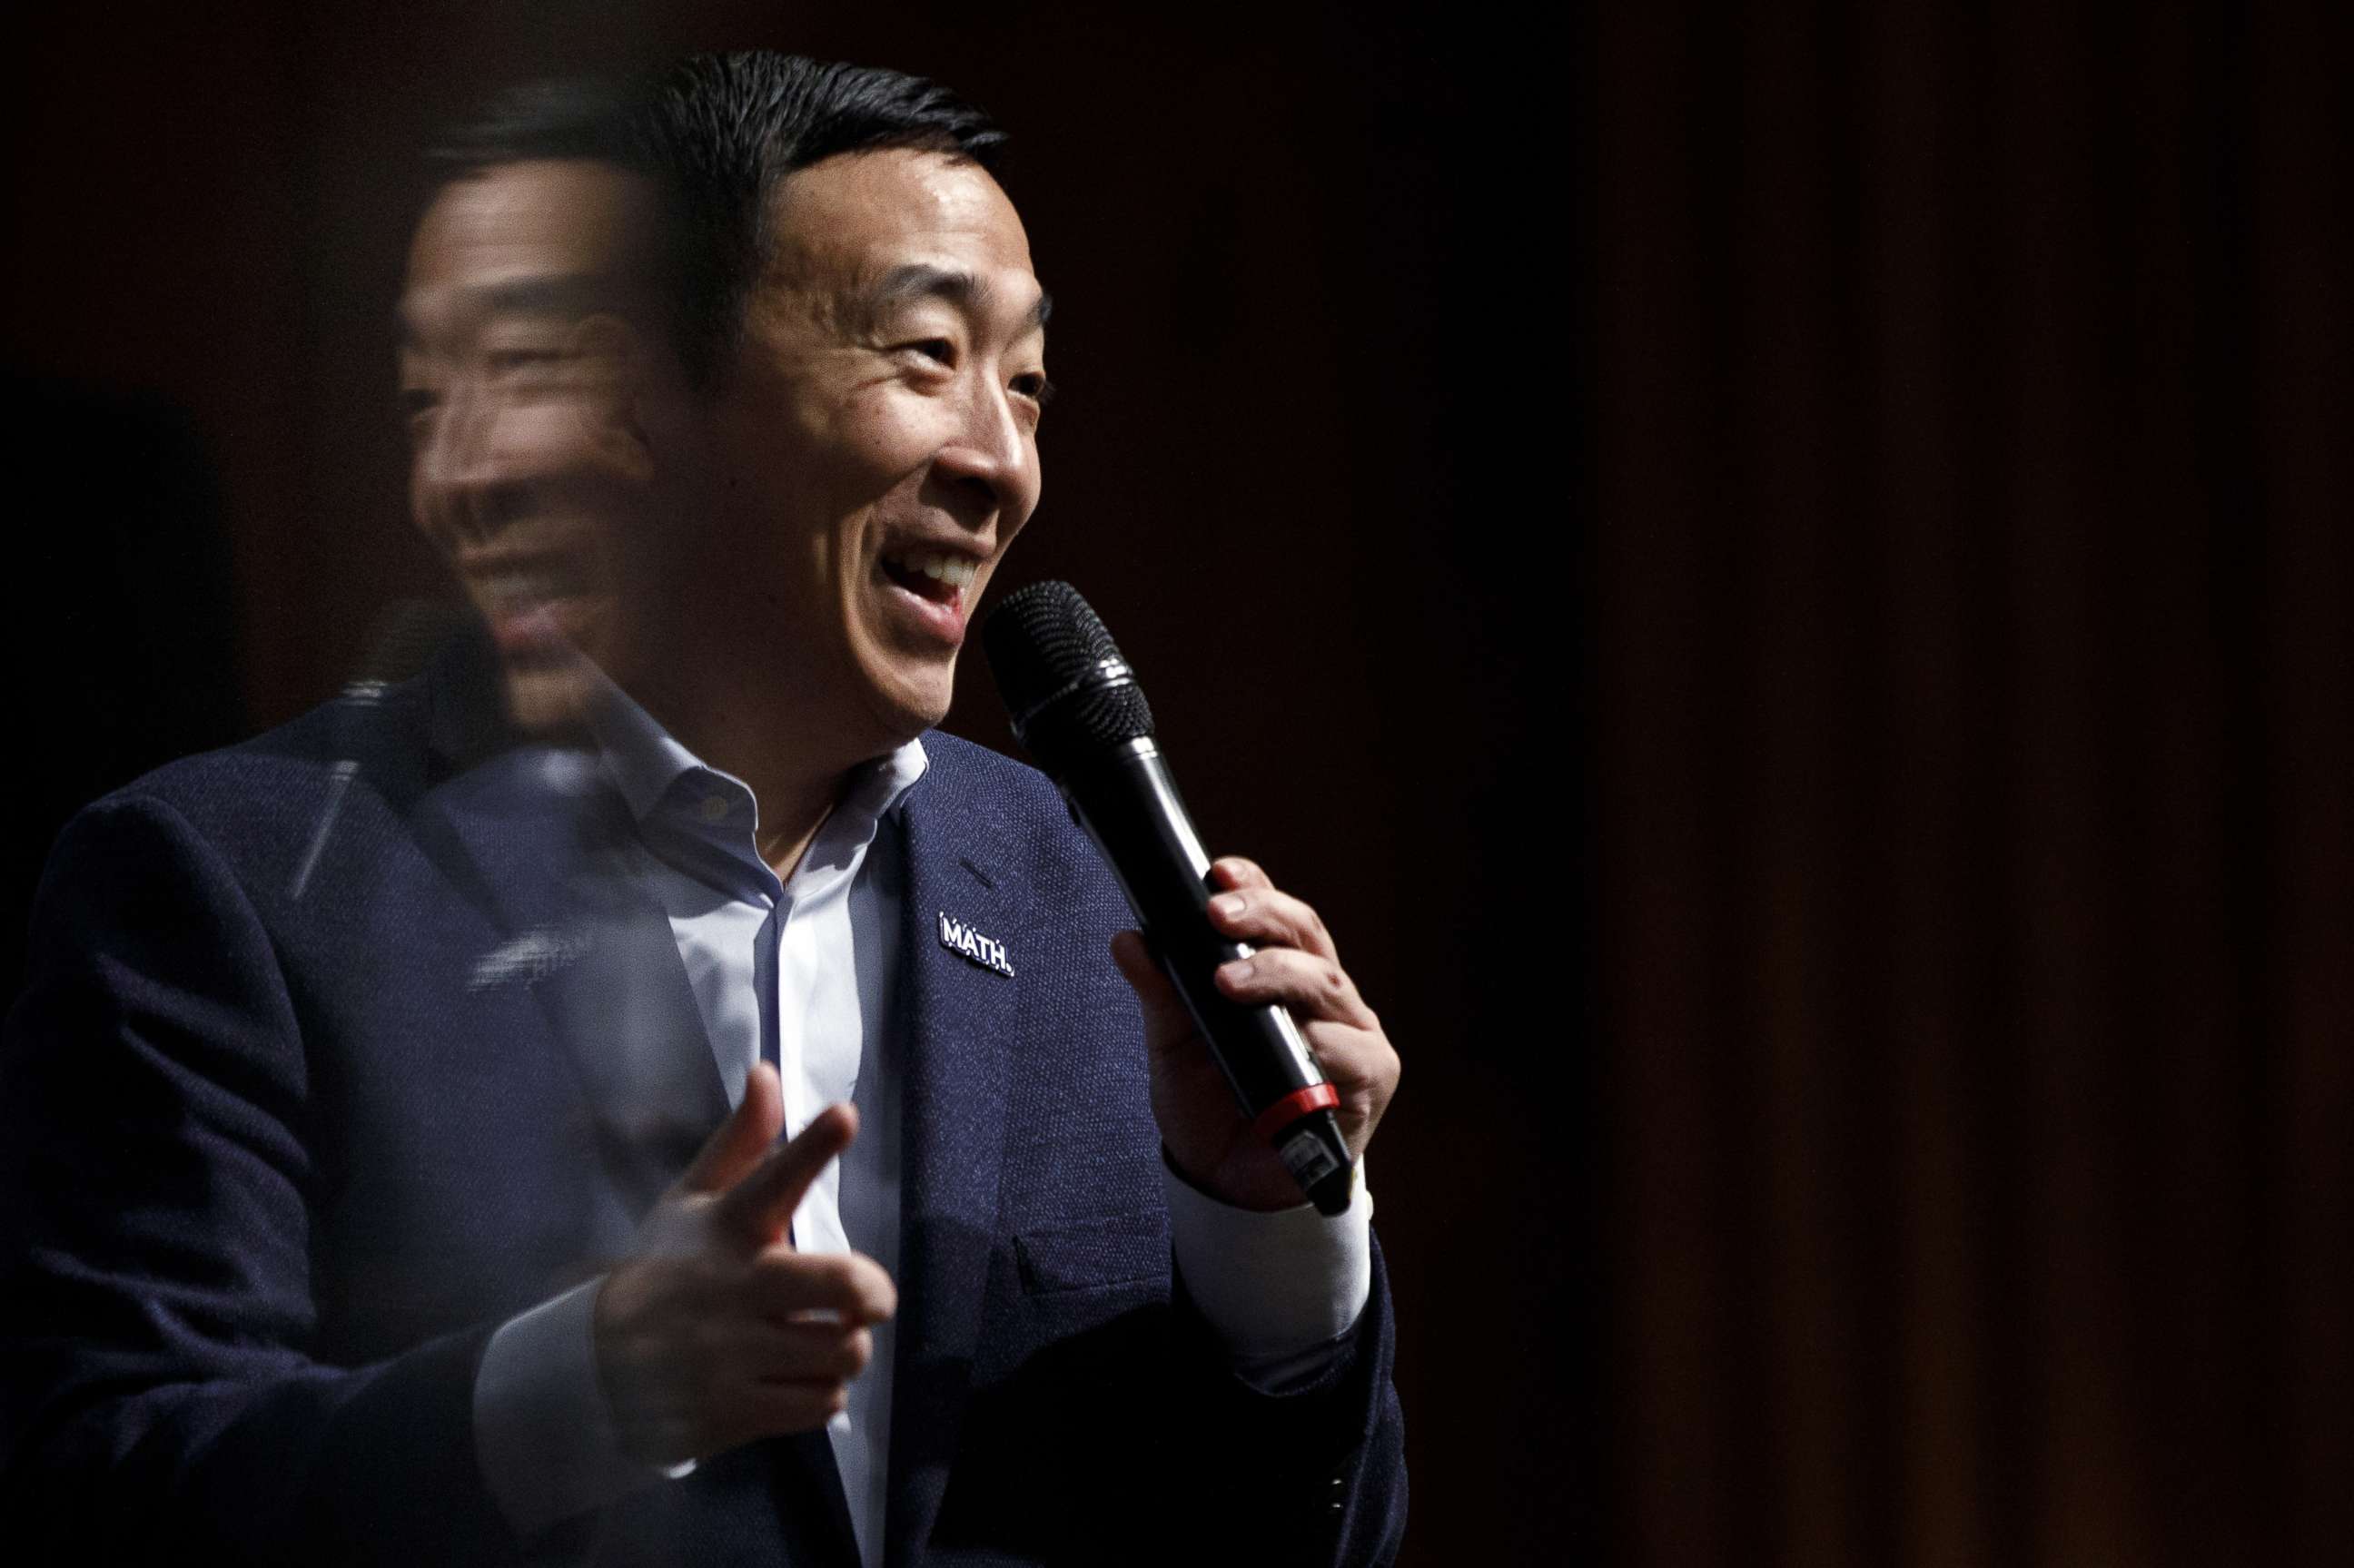 PHOTO: Democratic presidential candidate Andrew Yang delivers remarks during a campaign event at the University of Iowa on Jan. 29, 2020, in Iowa City, Iowa.